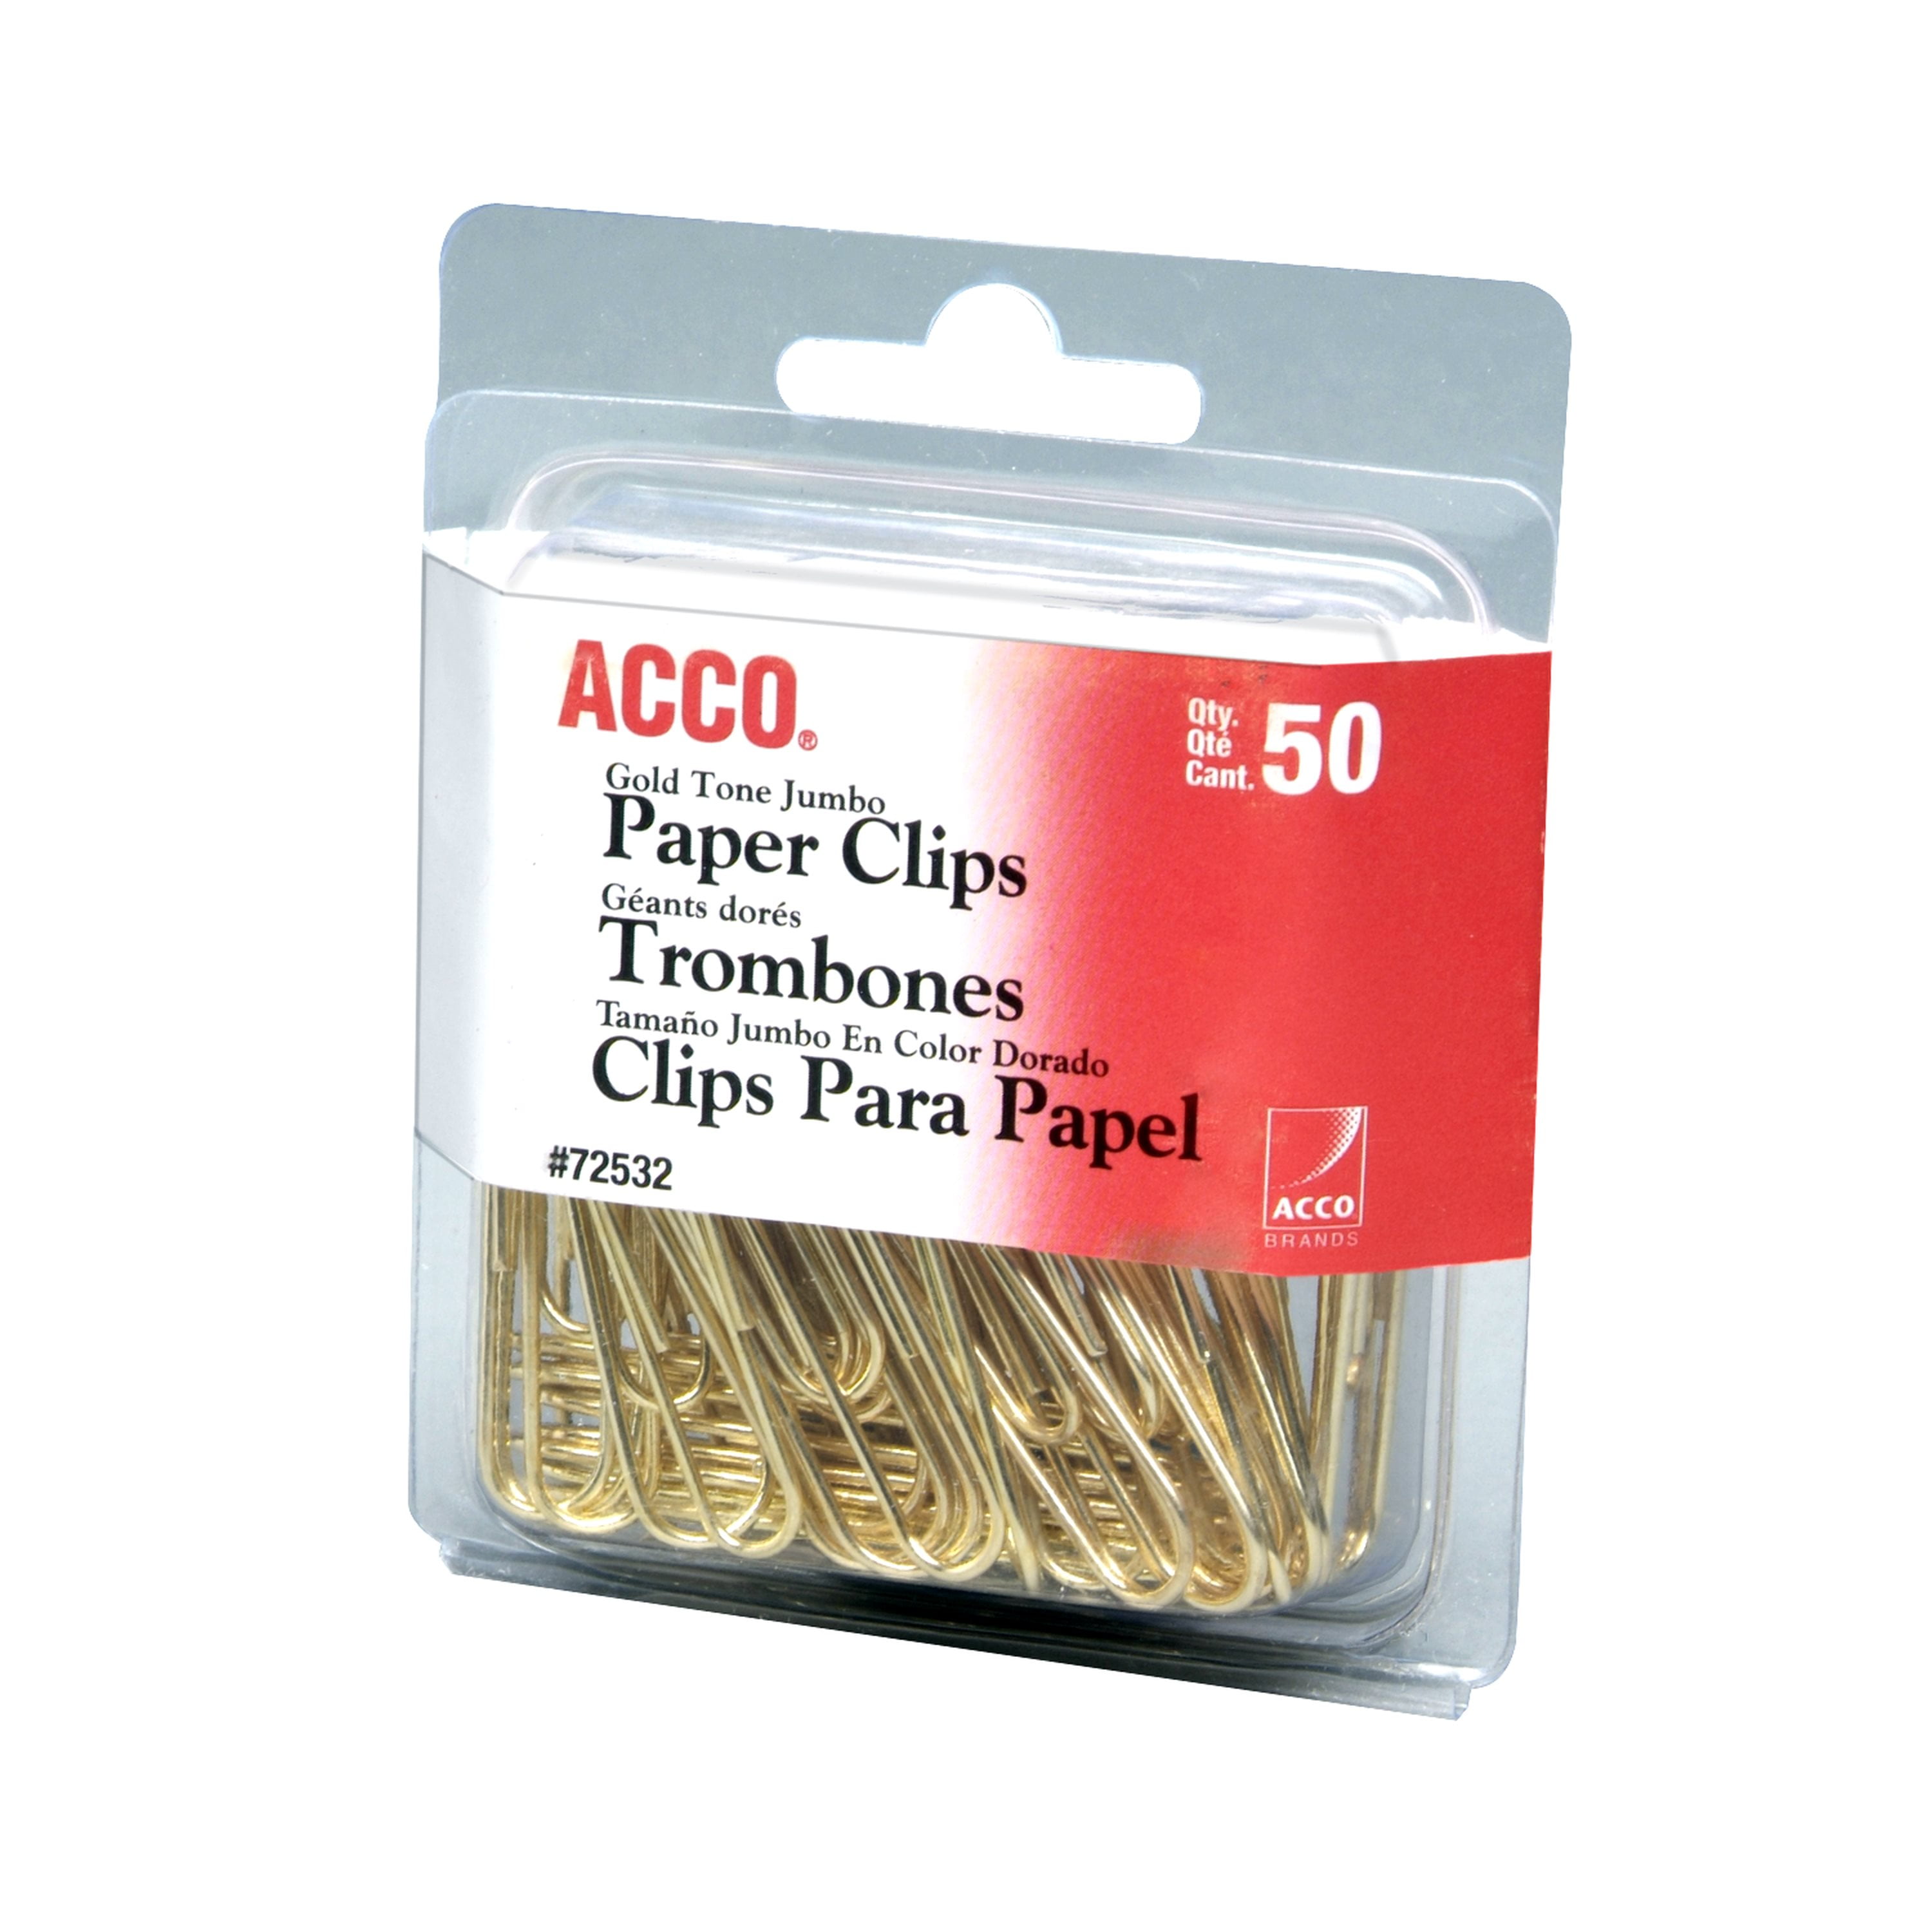 Klingy Smooth Paper Clips 300 Pcs Two Compartments with Free Bonus Magnetic Clip Holder Small 